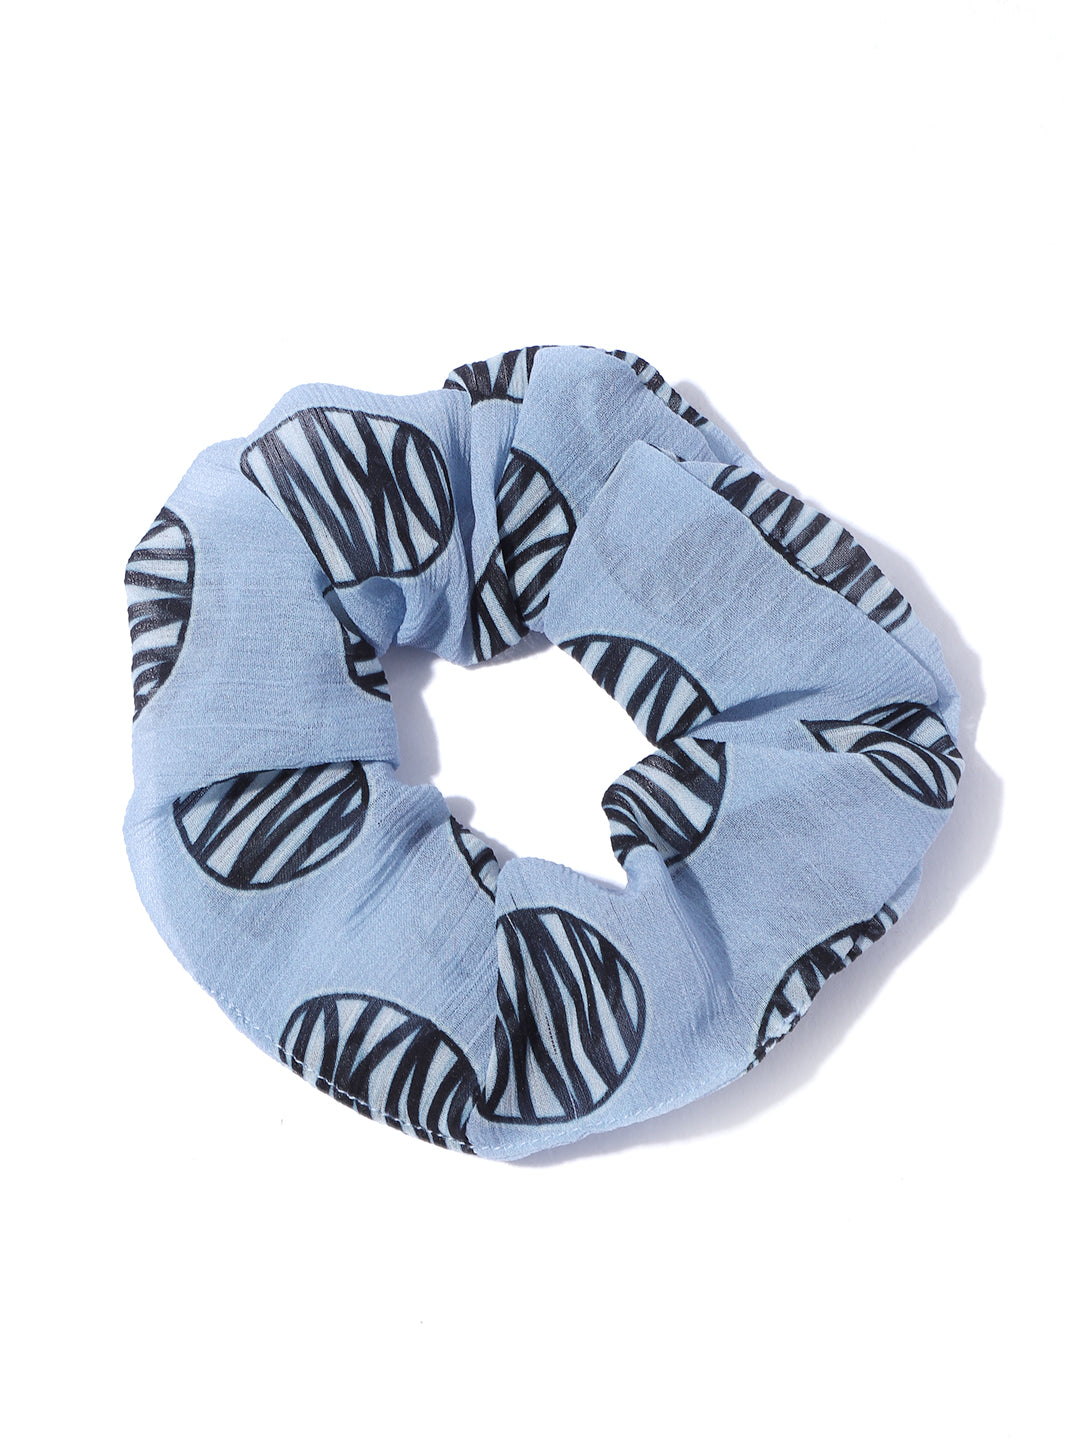 Blueberry set of 3 multi printed scrunchies